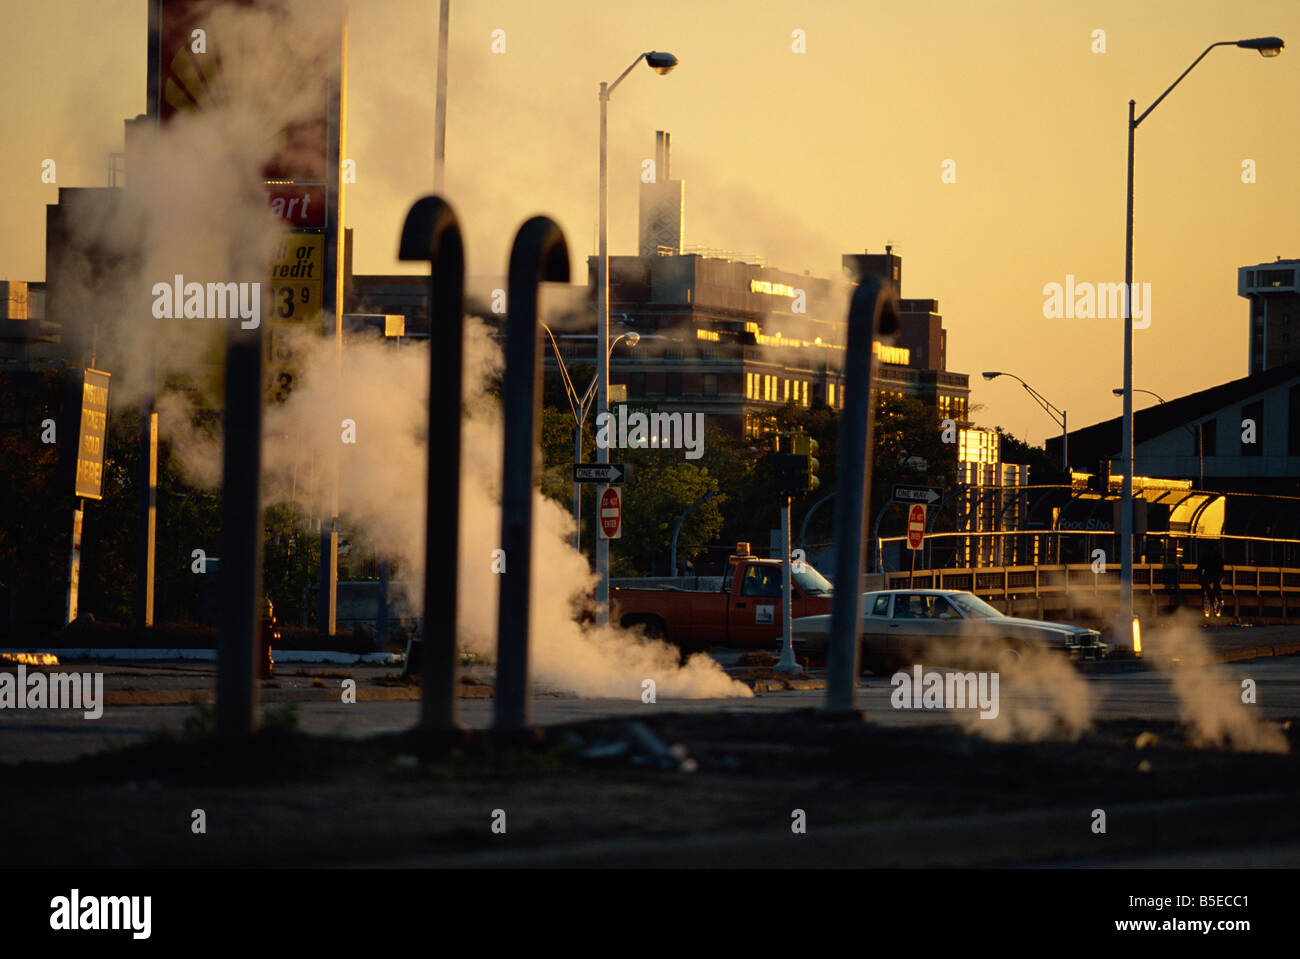 Steam escaping from below street at dusk, Hamtramck, a Polish inner city area, Detroit, Michigan, USA, North America Stock Photo